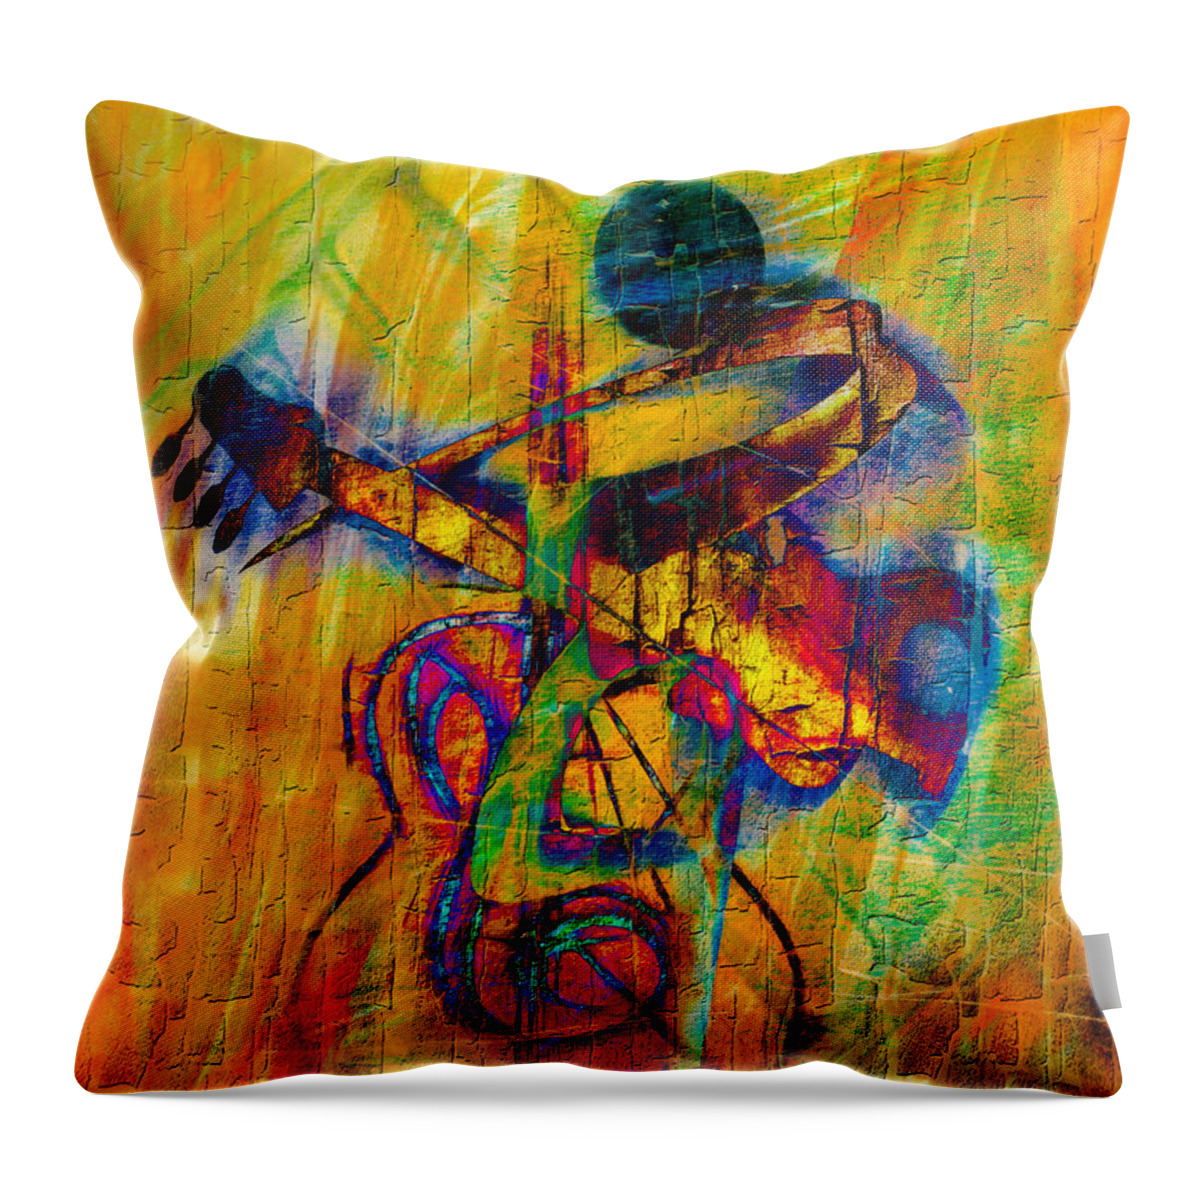 Abstract Guitarist Throw Pillow featuring the painting Cavatina by Georgiana Romanovna